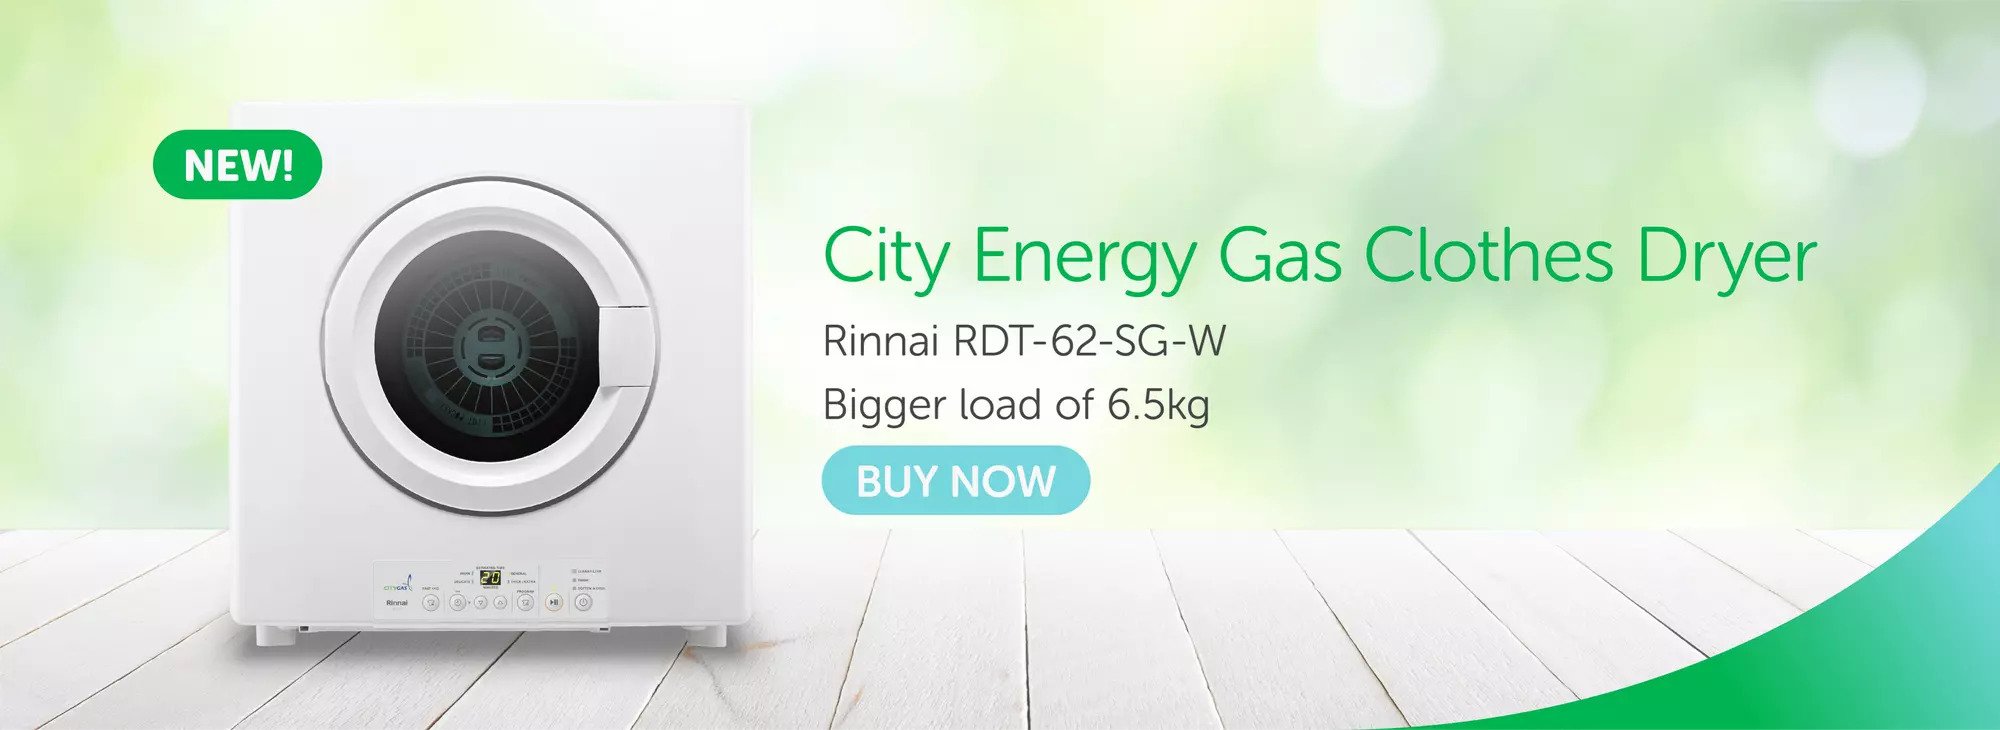 Gas Clothes Dryer by city energy life